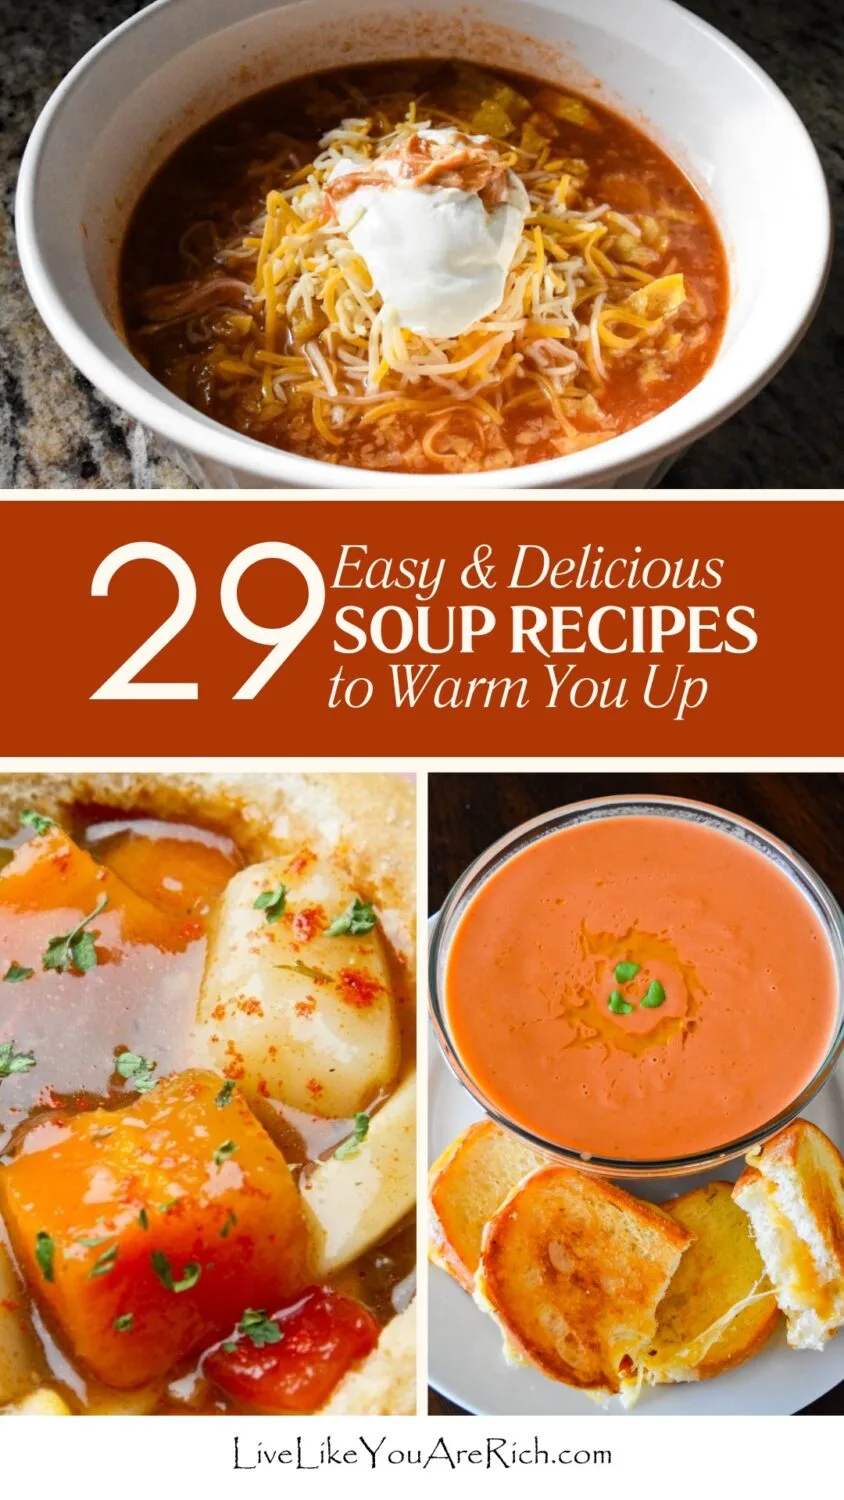 29 Easy and Delicious Soup Recipes to Warm You Up